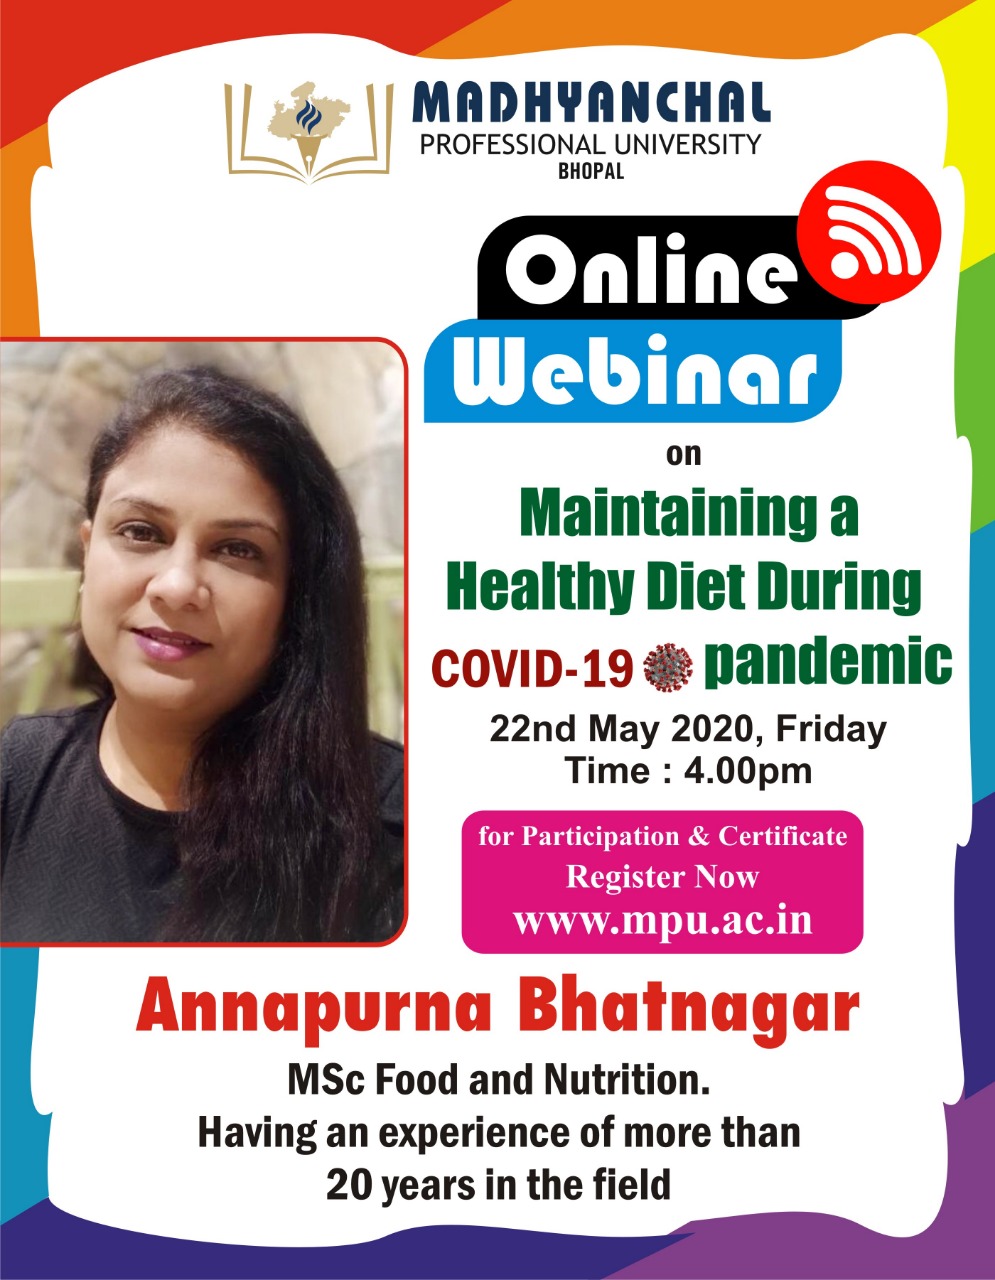 Webinar on Healthy Eating During COVID-19